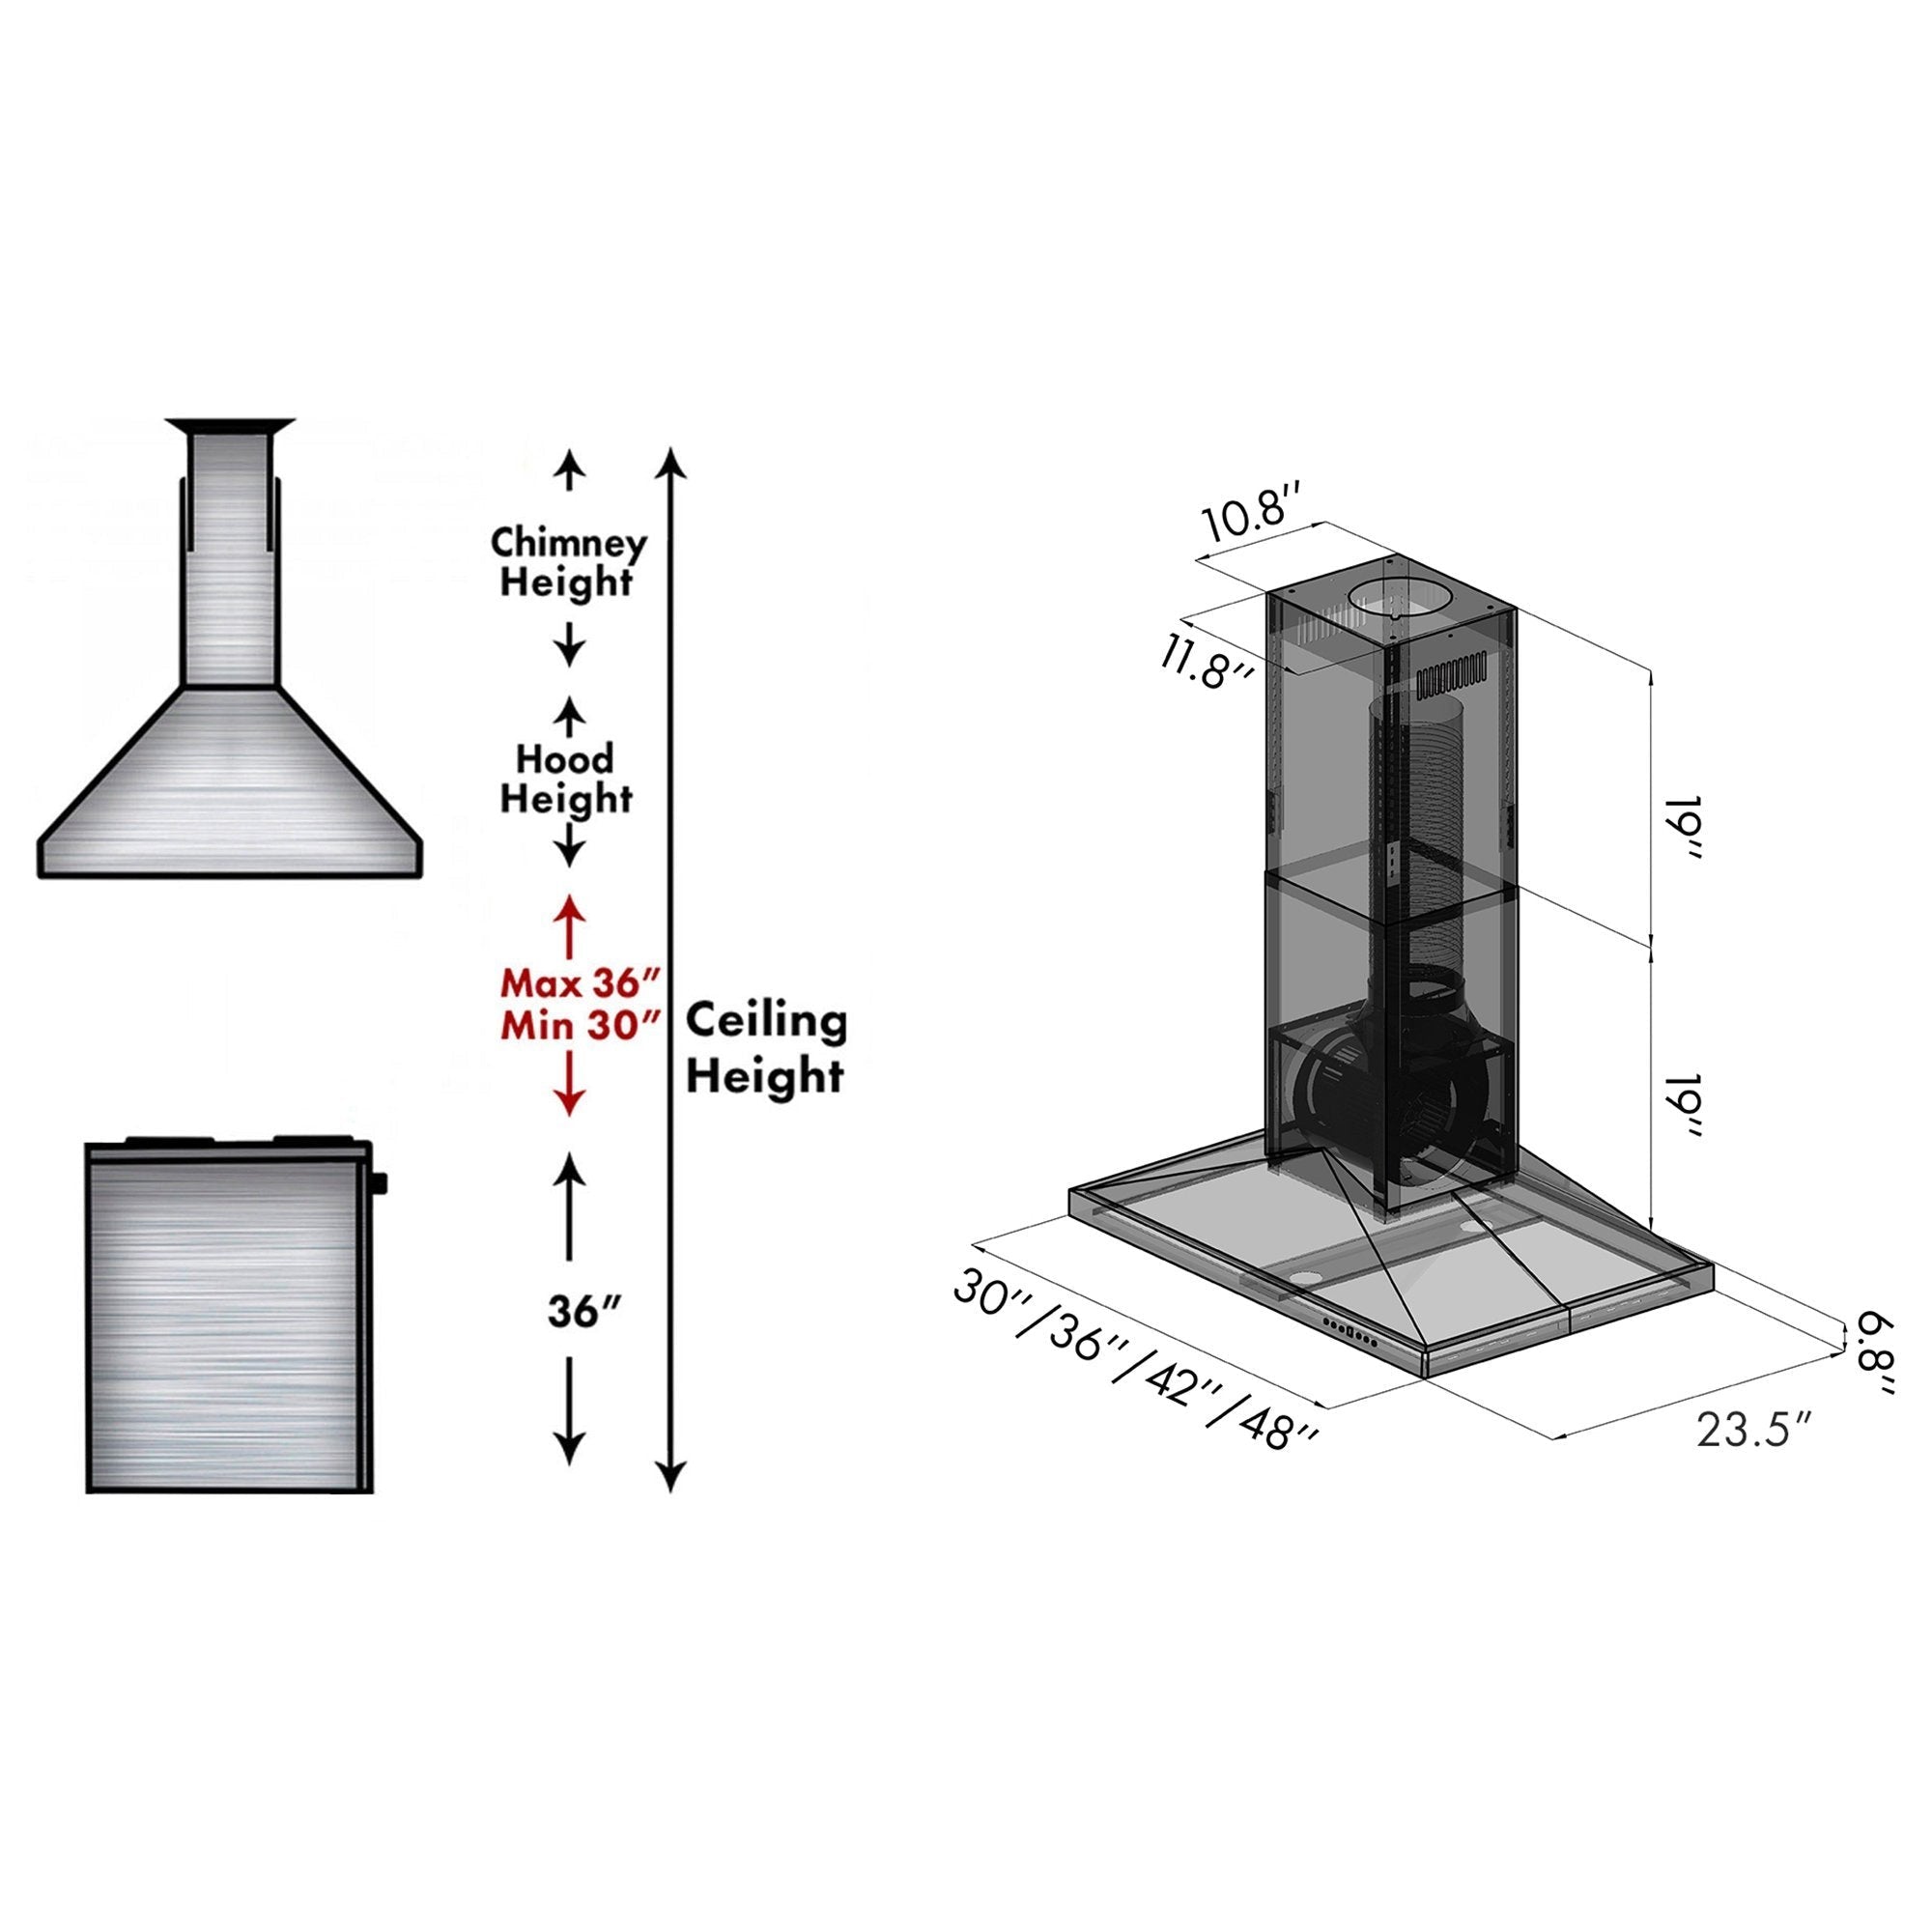 ZLINE Convertible Vent Island Mount Range Hood in Stainless Steel (GL2i) dimensional measurements and chimney height guide.